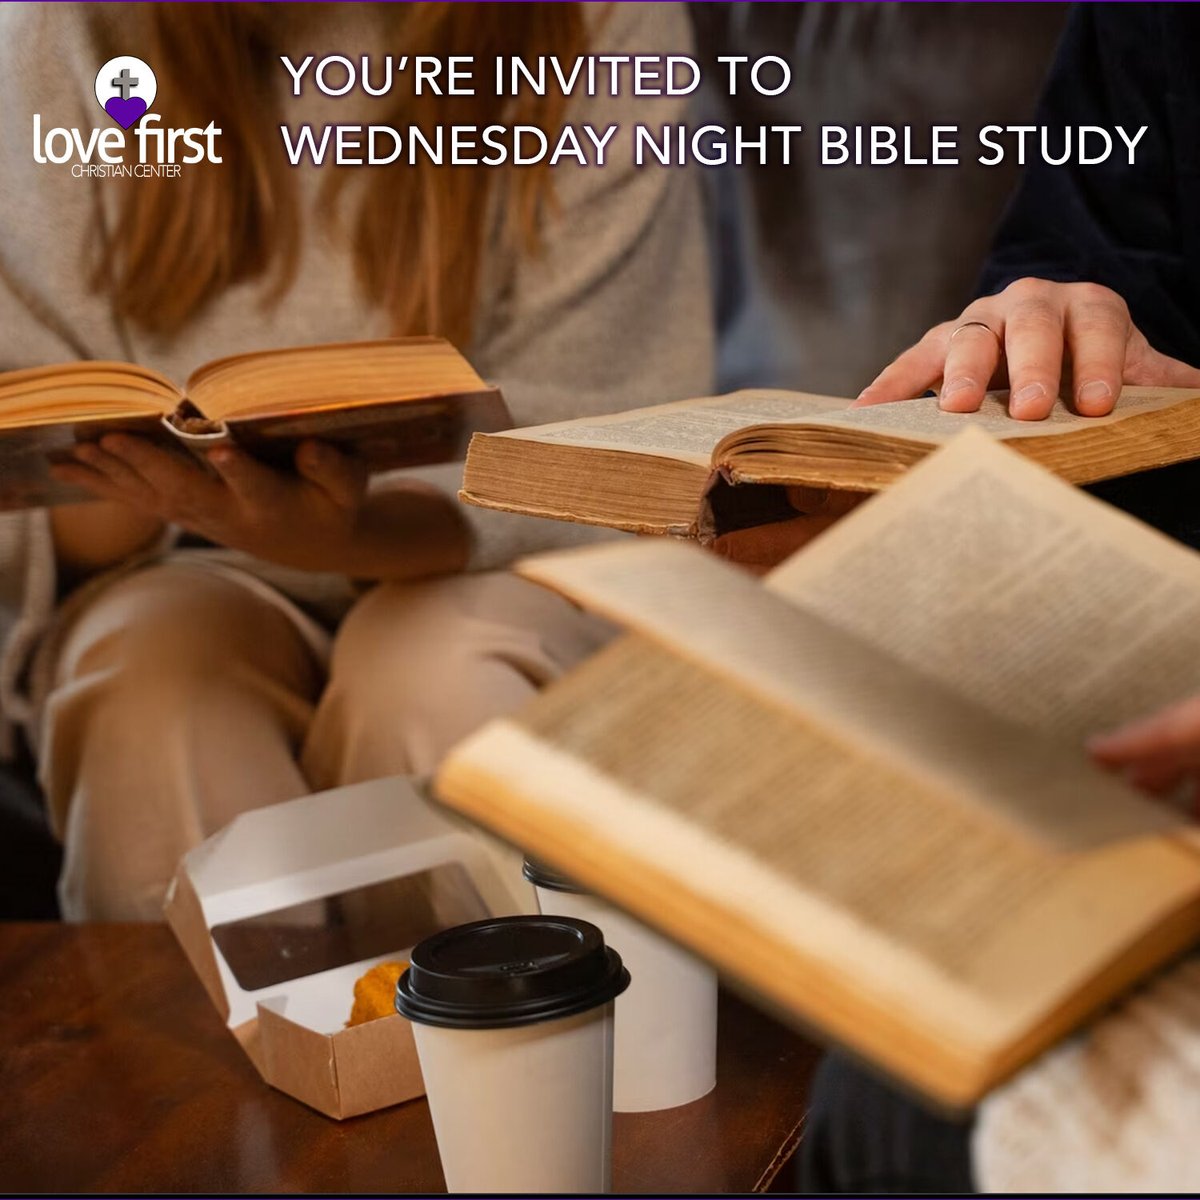 Join LFCC every Wednesday, 7-8:30 pm, at Riverview Campus or online for our inspiring Bible Study. Discover practical ways to apply God's word to your life. See you next Wednesday!
 
#WednesdayBibleStudy #LoveFirstChristianCenter #GrowInFaith #LFCC #WednesdayWisdom #BibleStudy